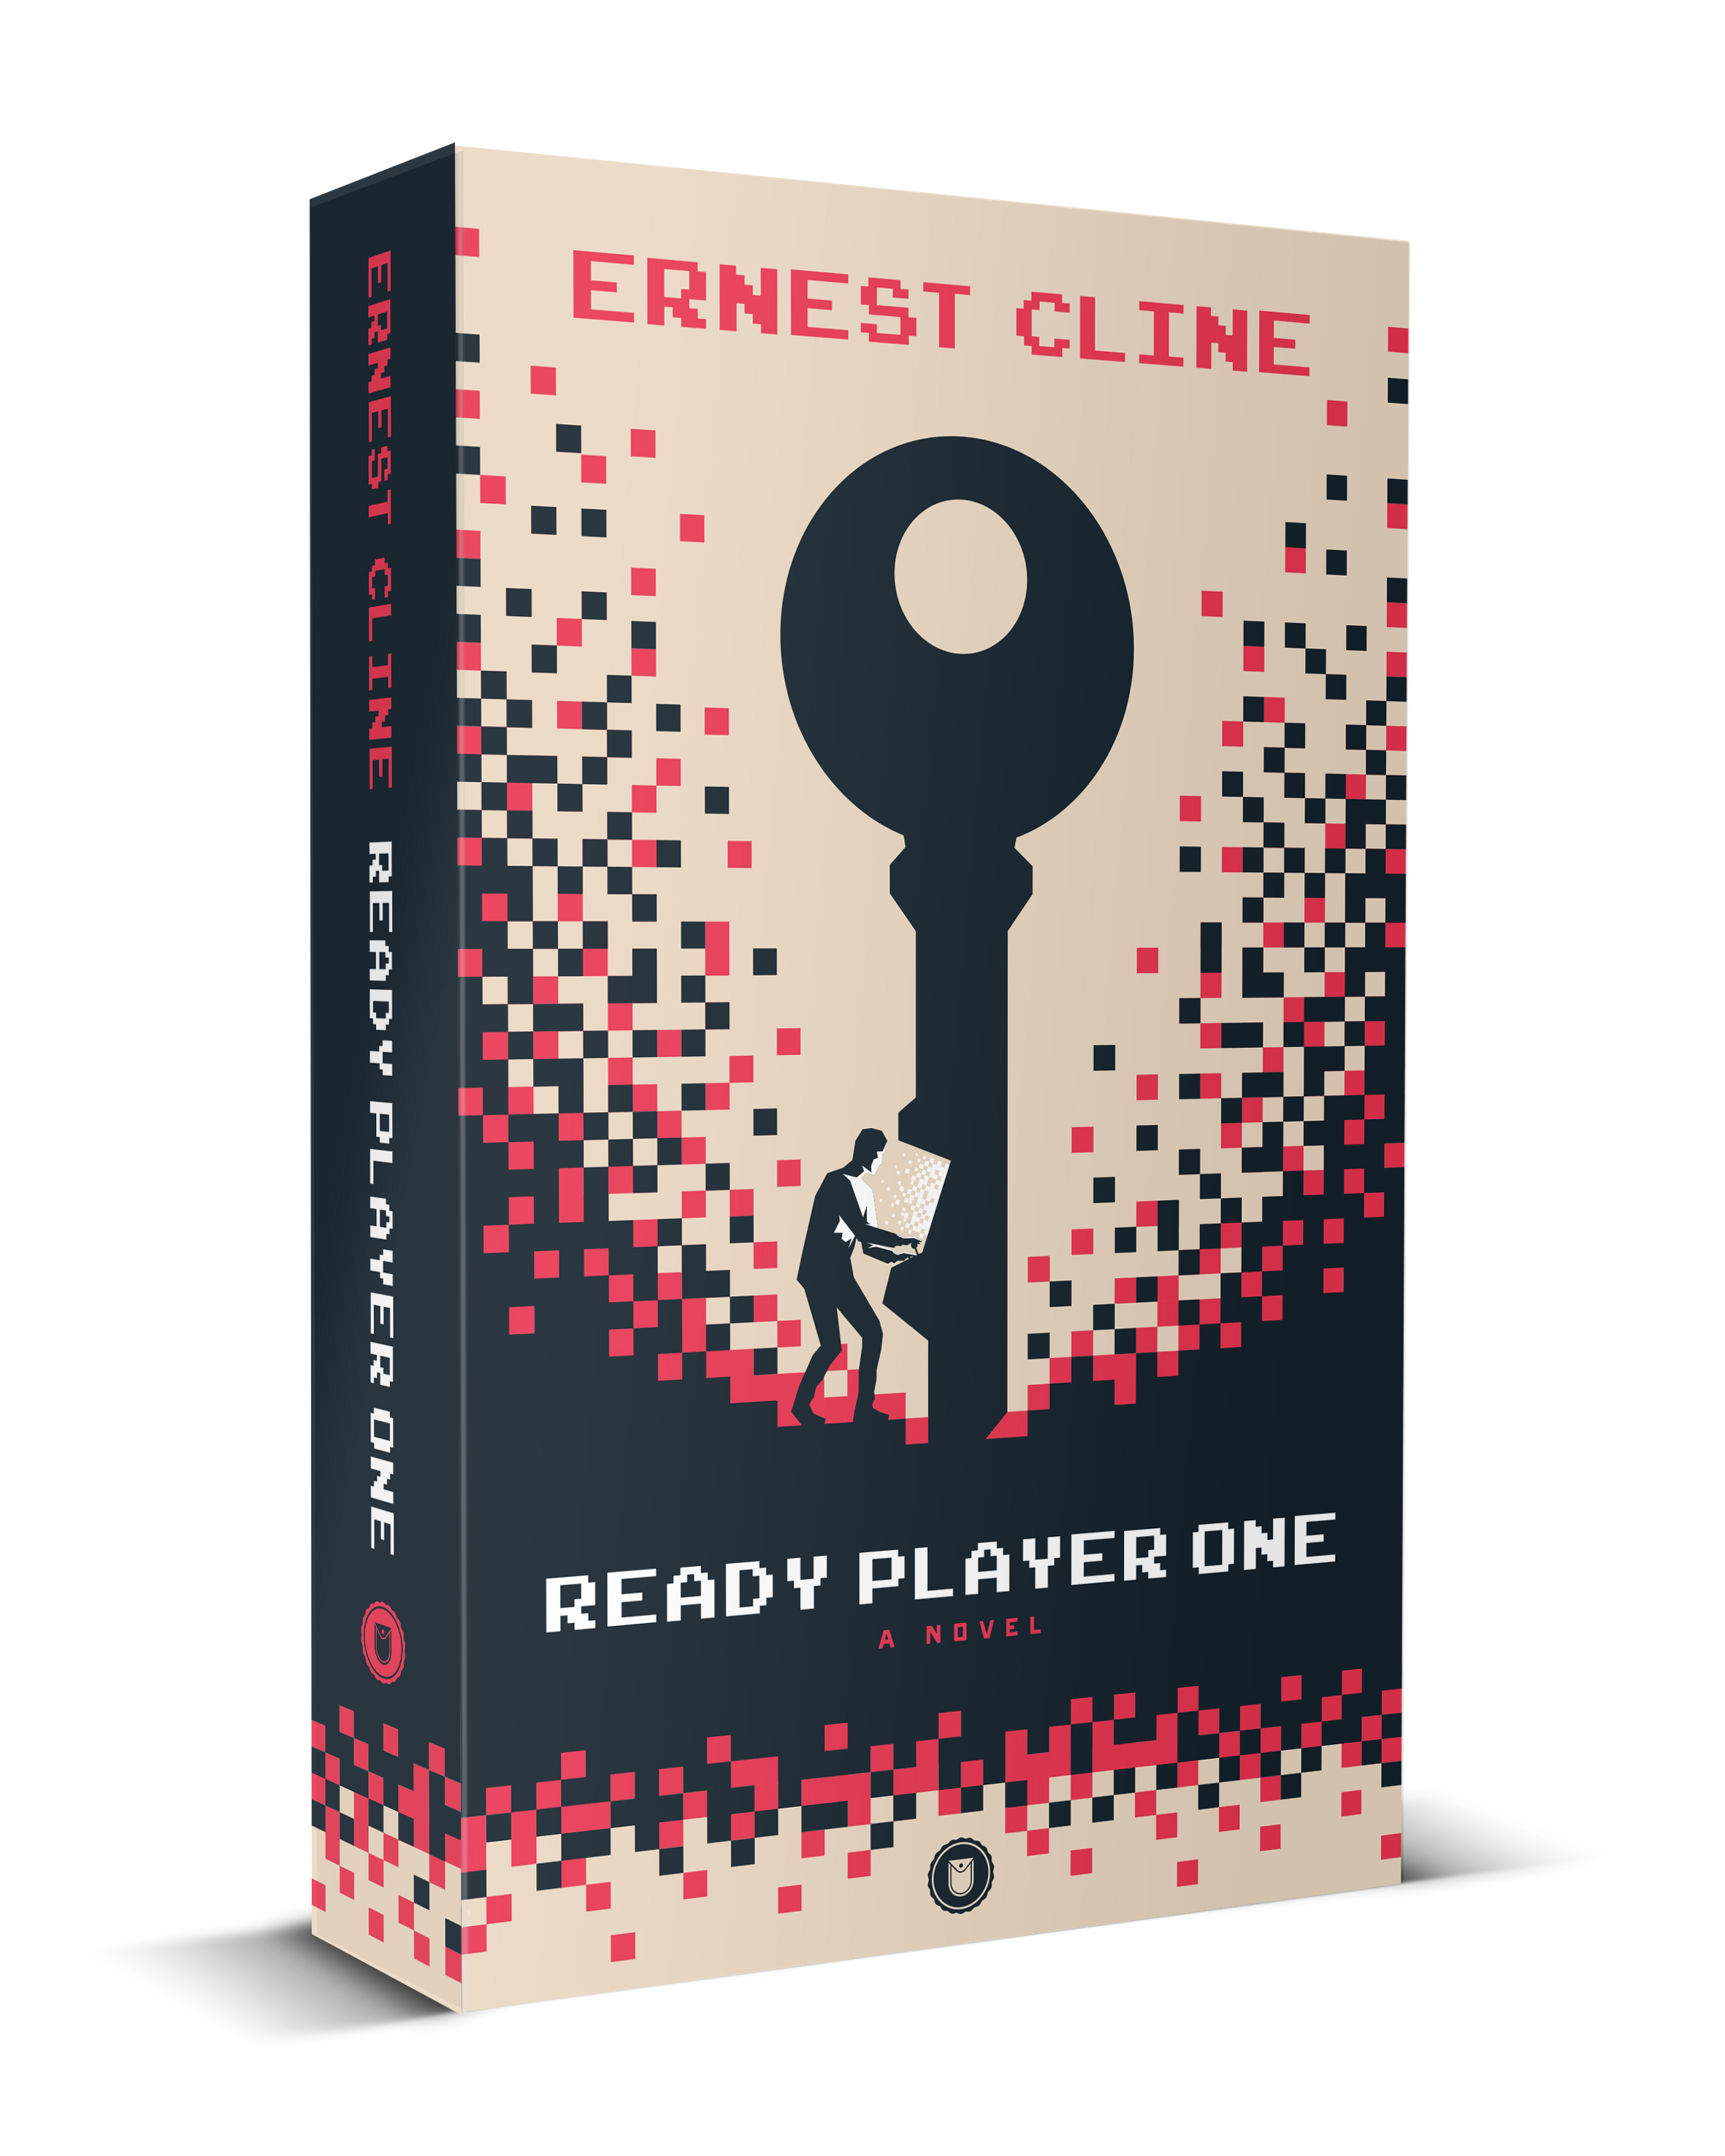 Ready Player One by Ernest Cline Printable Book Cover 